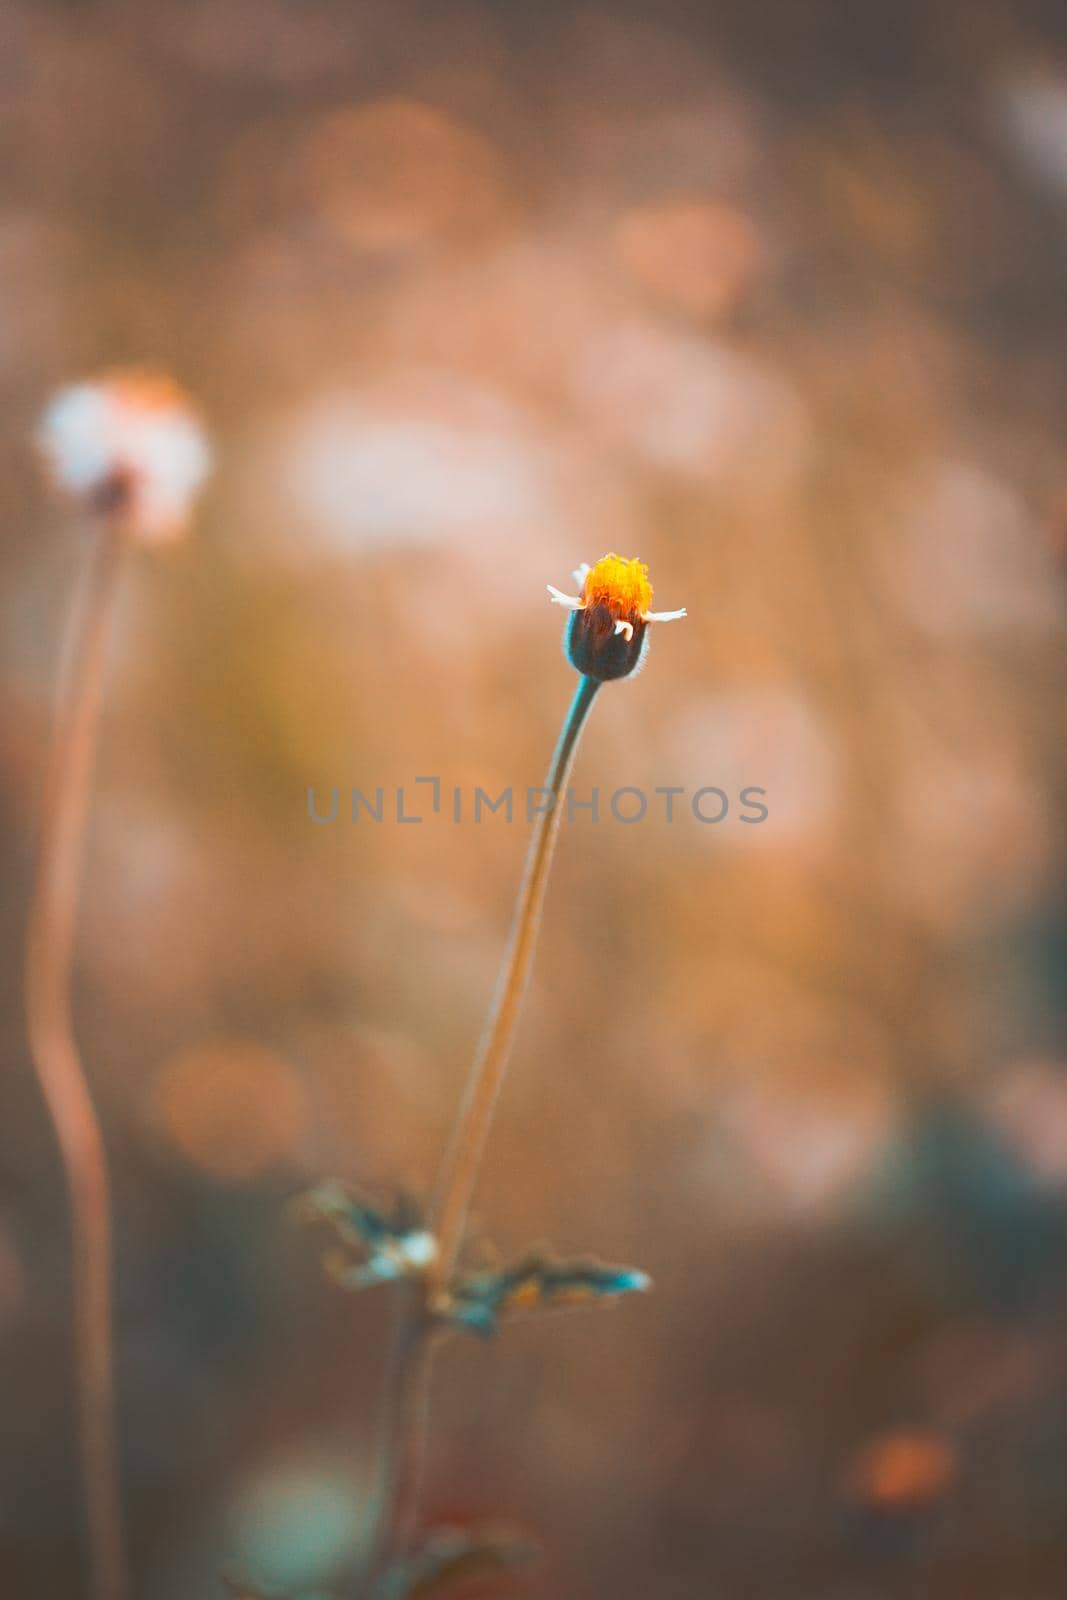 Vintage little flower in soft focus and blurred for background, little flowers field in the morning sunshine